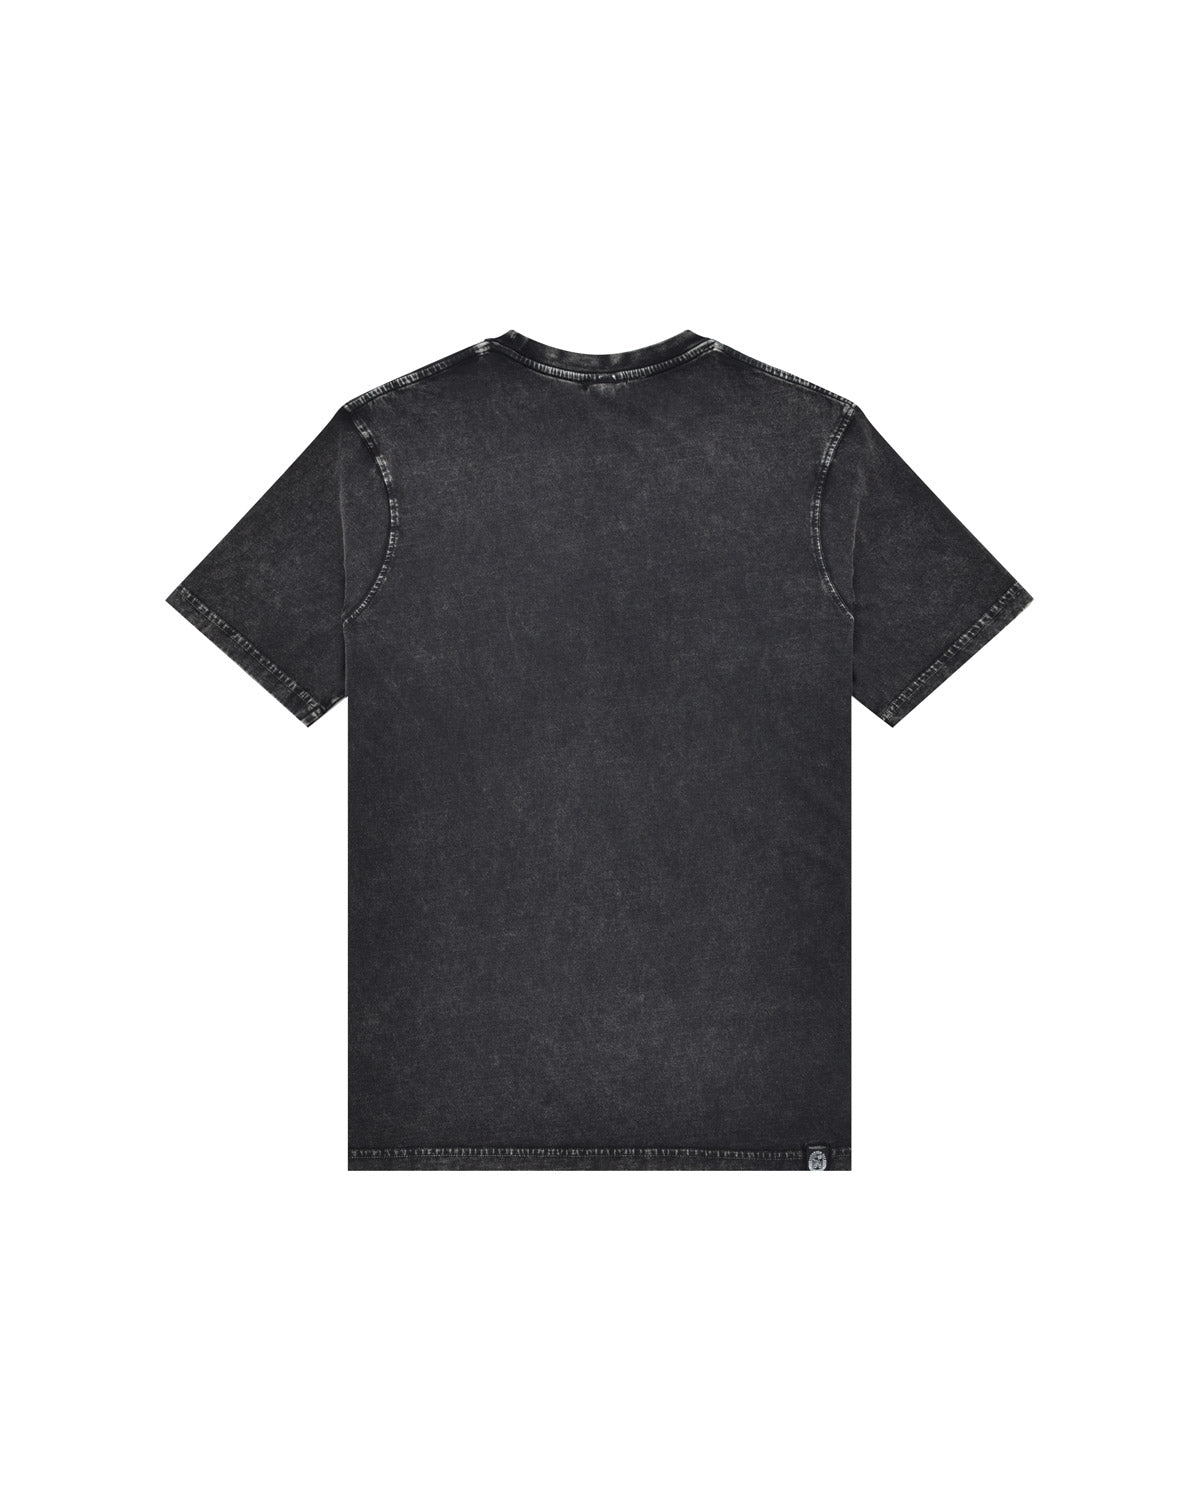 Man | Black T-Shirt "Surf Is Not Dead" Washed Effect